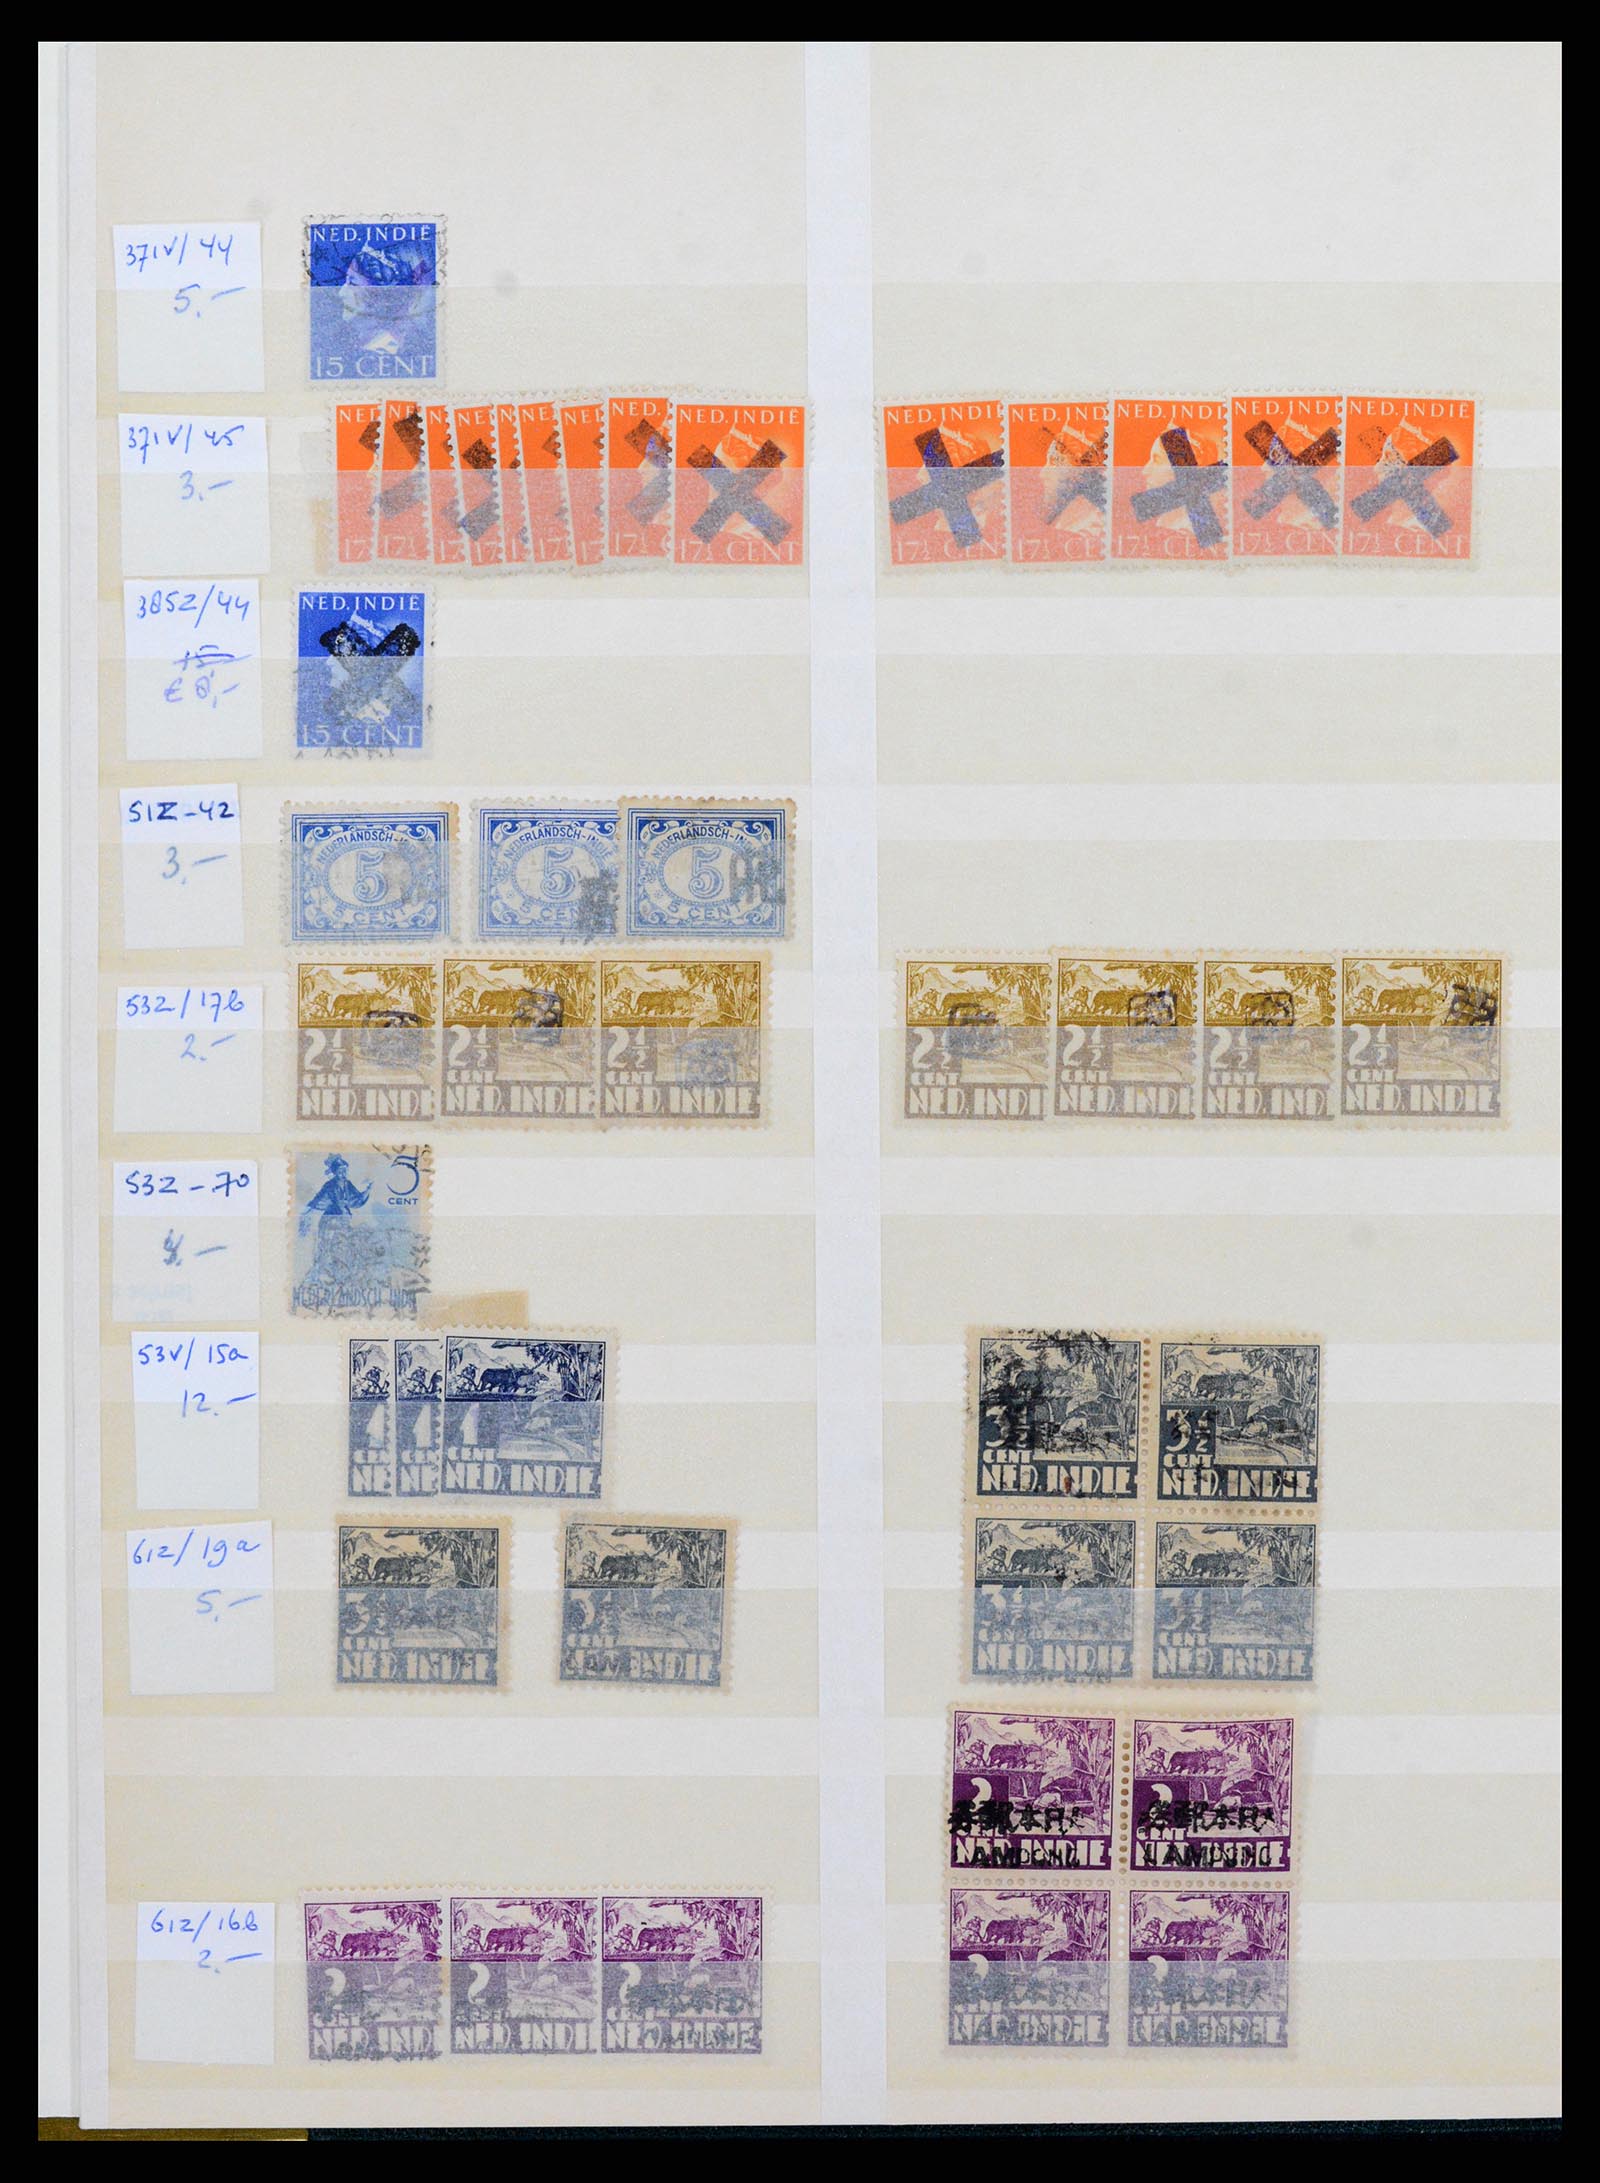 37429 002 - Stamp collection 37429 Japanese occupation Dutch East Indies 1942-1945.